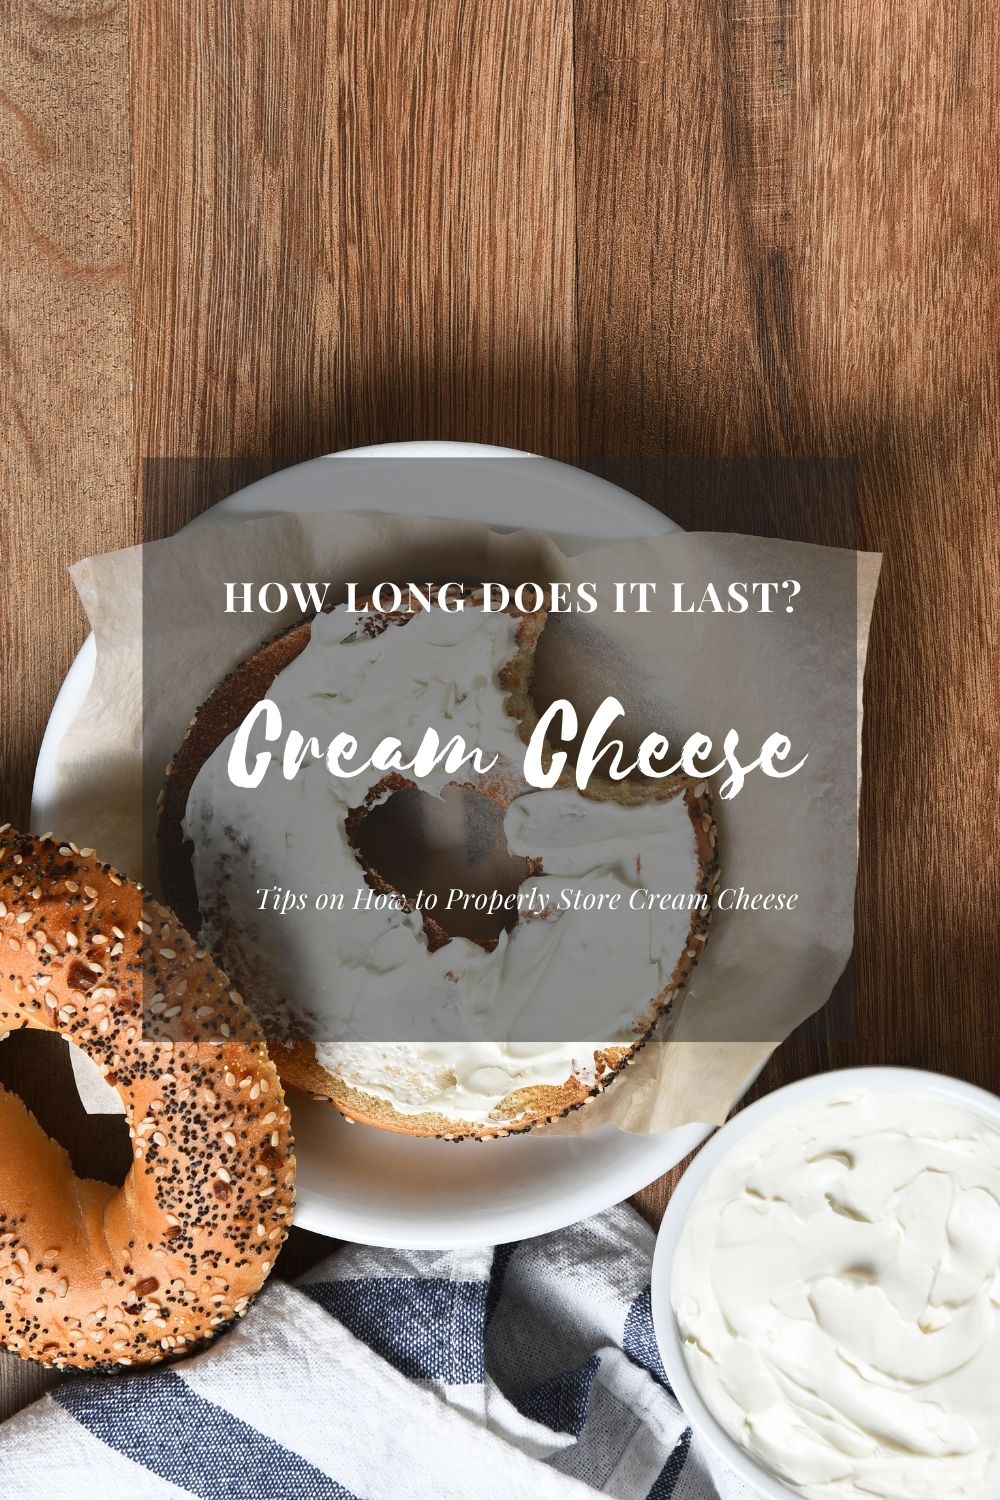 How Long Does Cream Cheese Last?